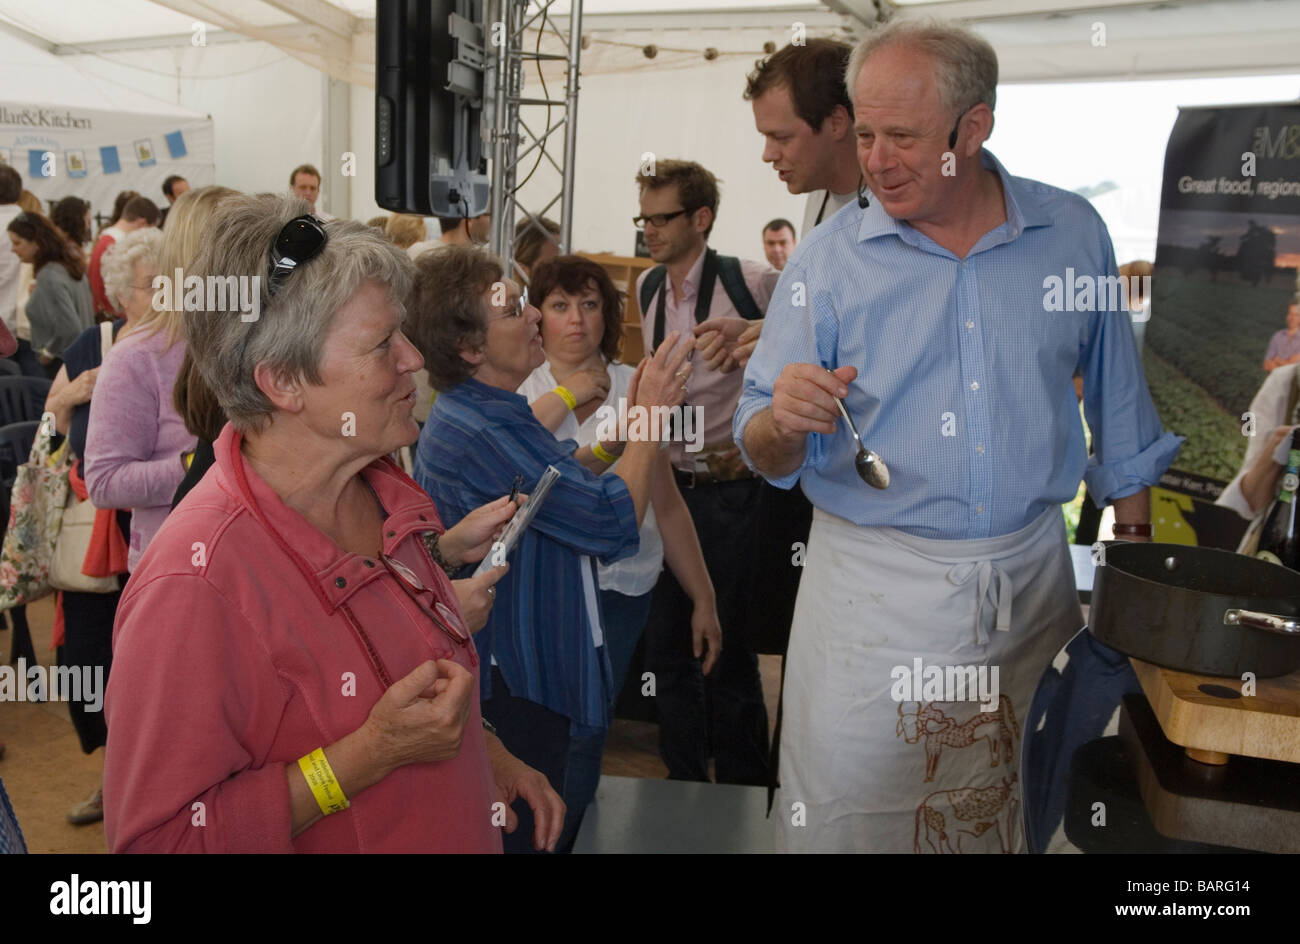 Matthew Fort giving food cooking demonstration audience member. Tom Parker Bowles (behind) Aldeburgh Food Fair at Snape Maltings Suffolk 2009 2000s UK Stock Photo